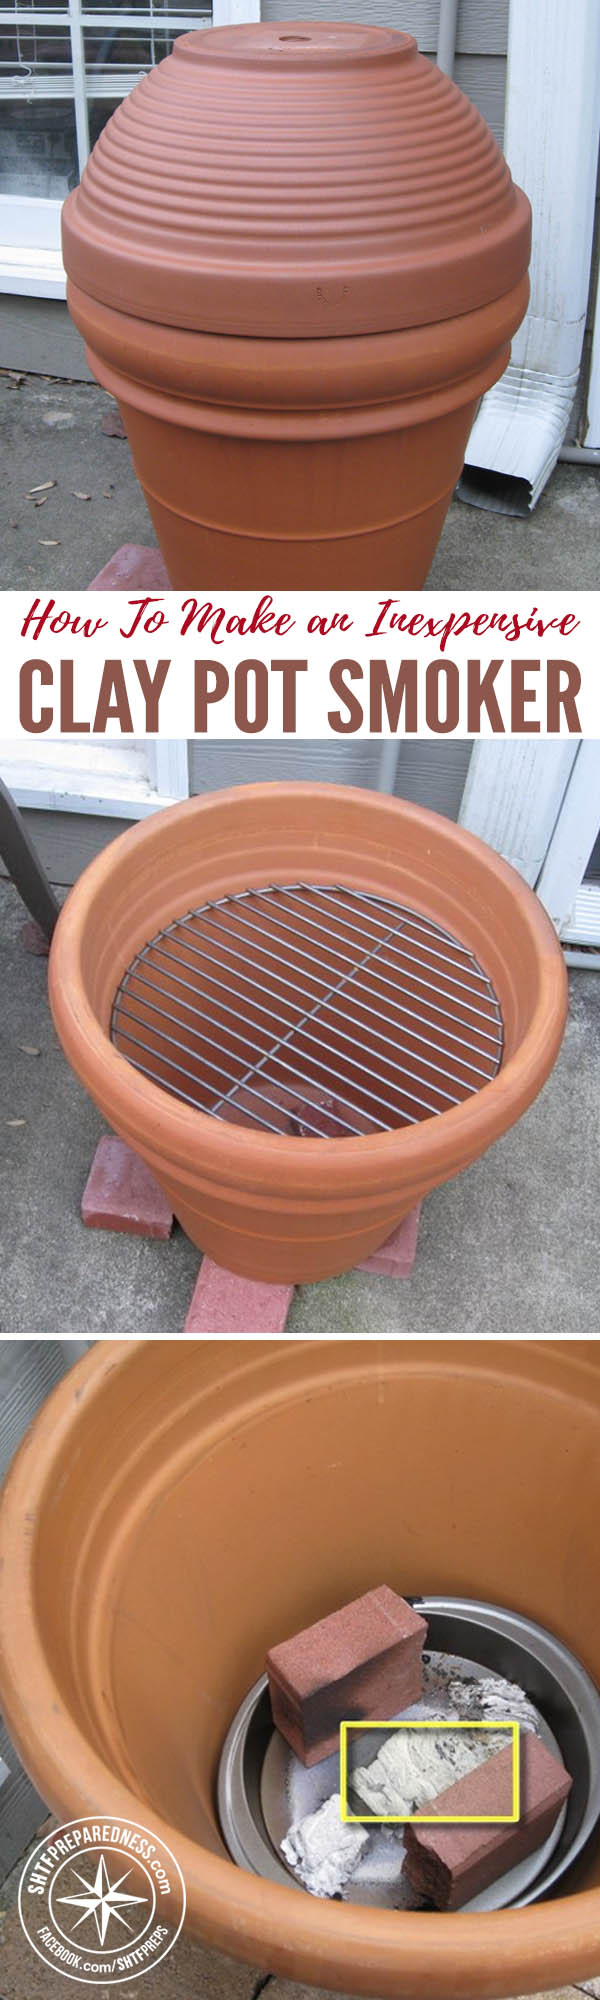 How To Make an Inexpensive Clay Pot Smoker — I love smoked meat! Any time of the year is a good time for smoked meat. However, I do not love how expensive smokers are. Luckily, there are tutorials out there that show you how to make a smoker of your own.